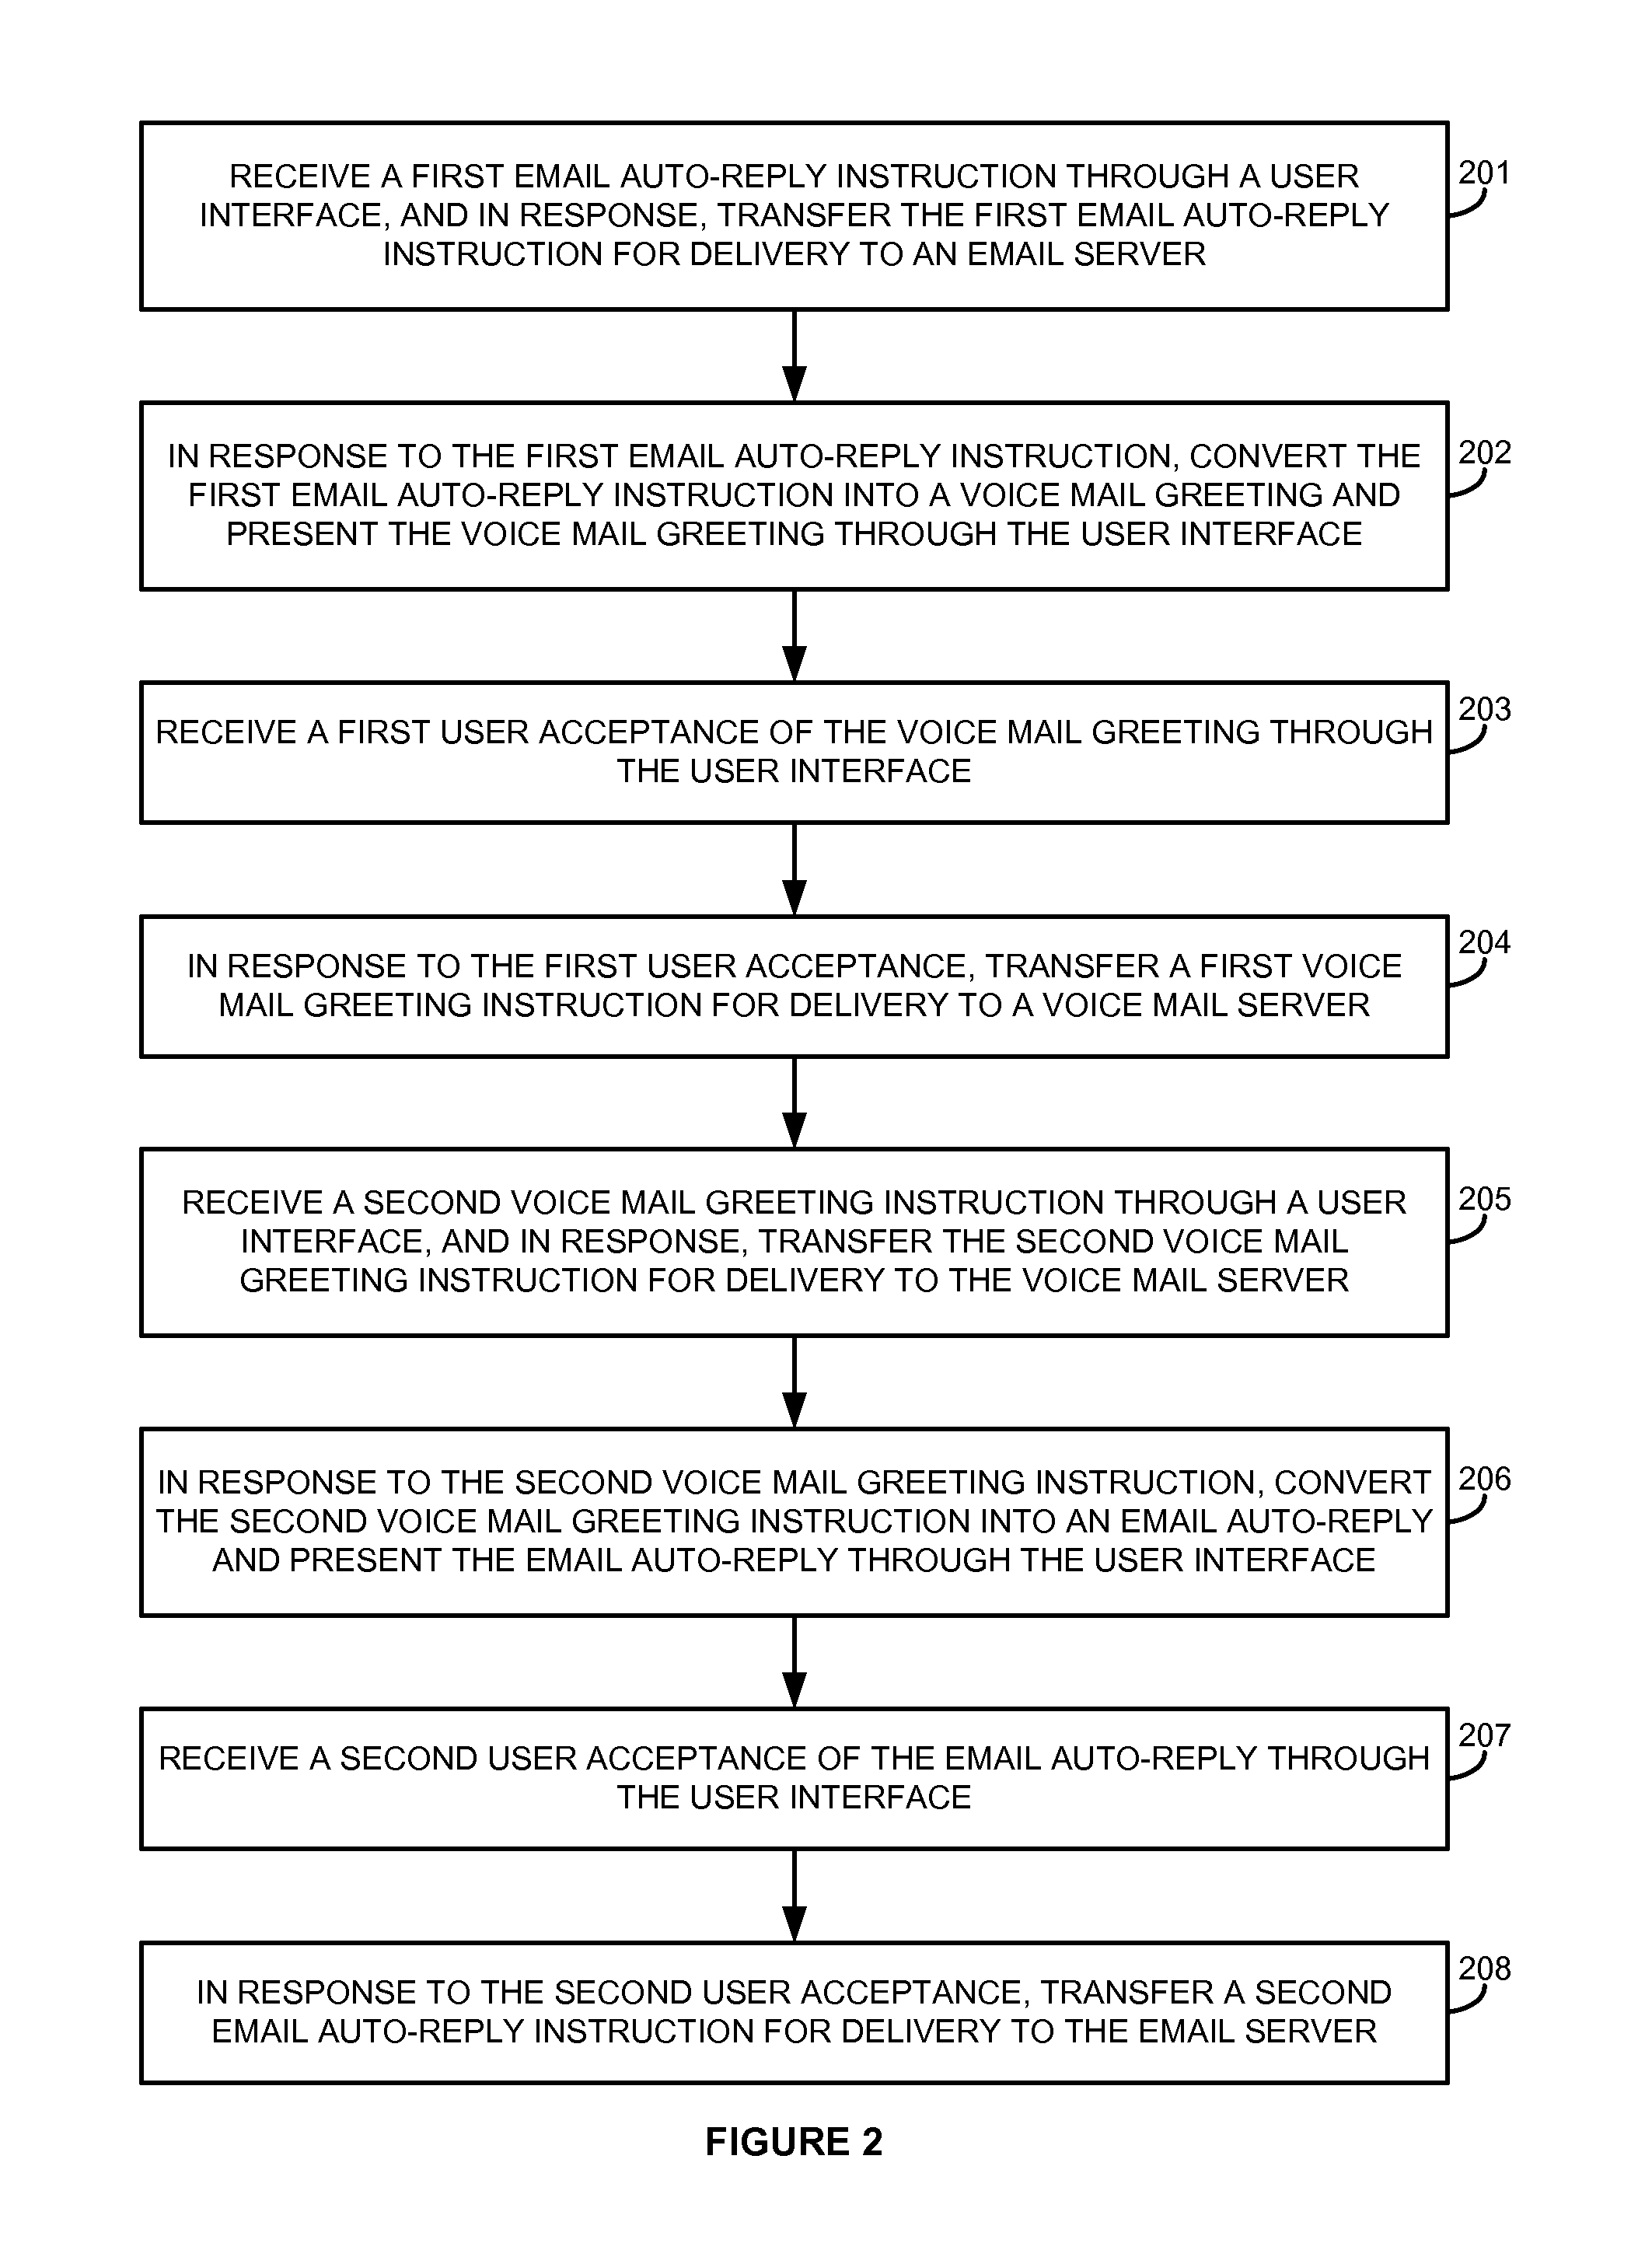 Synchronization of voice mail greeting and email auto-reply by a wireless communication device